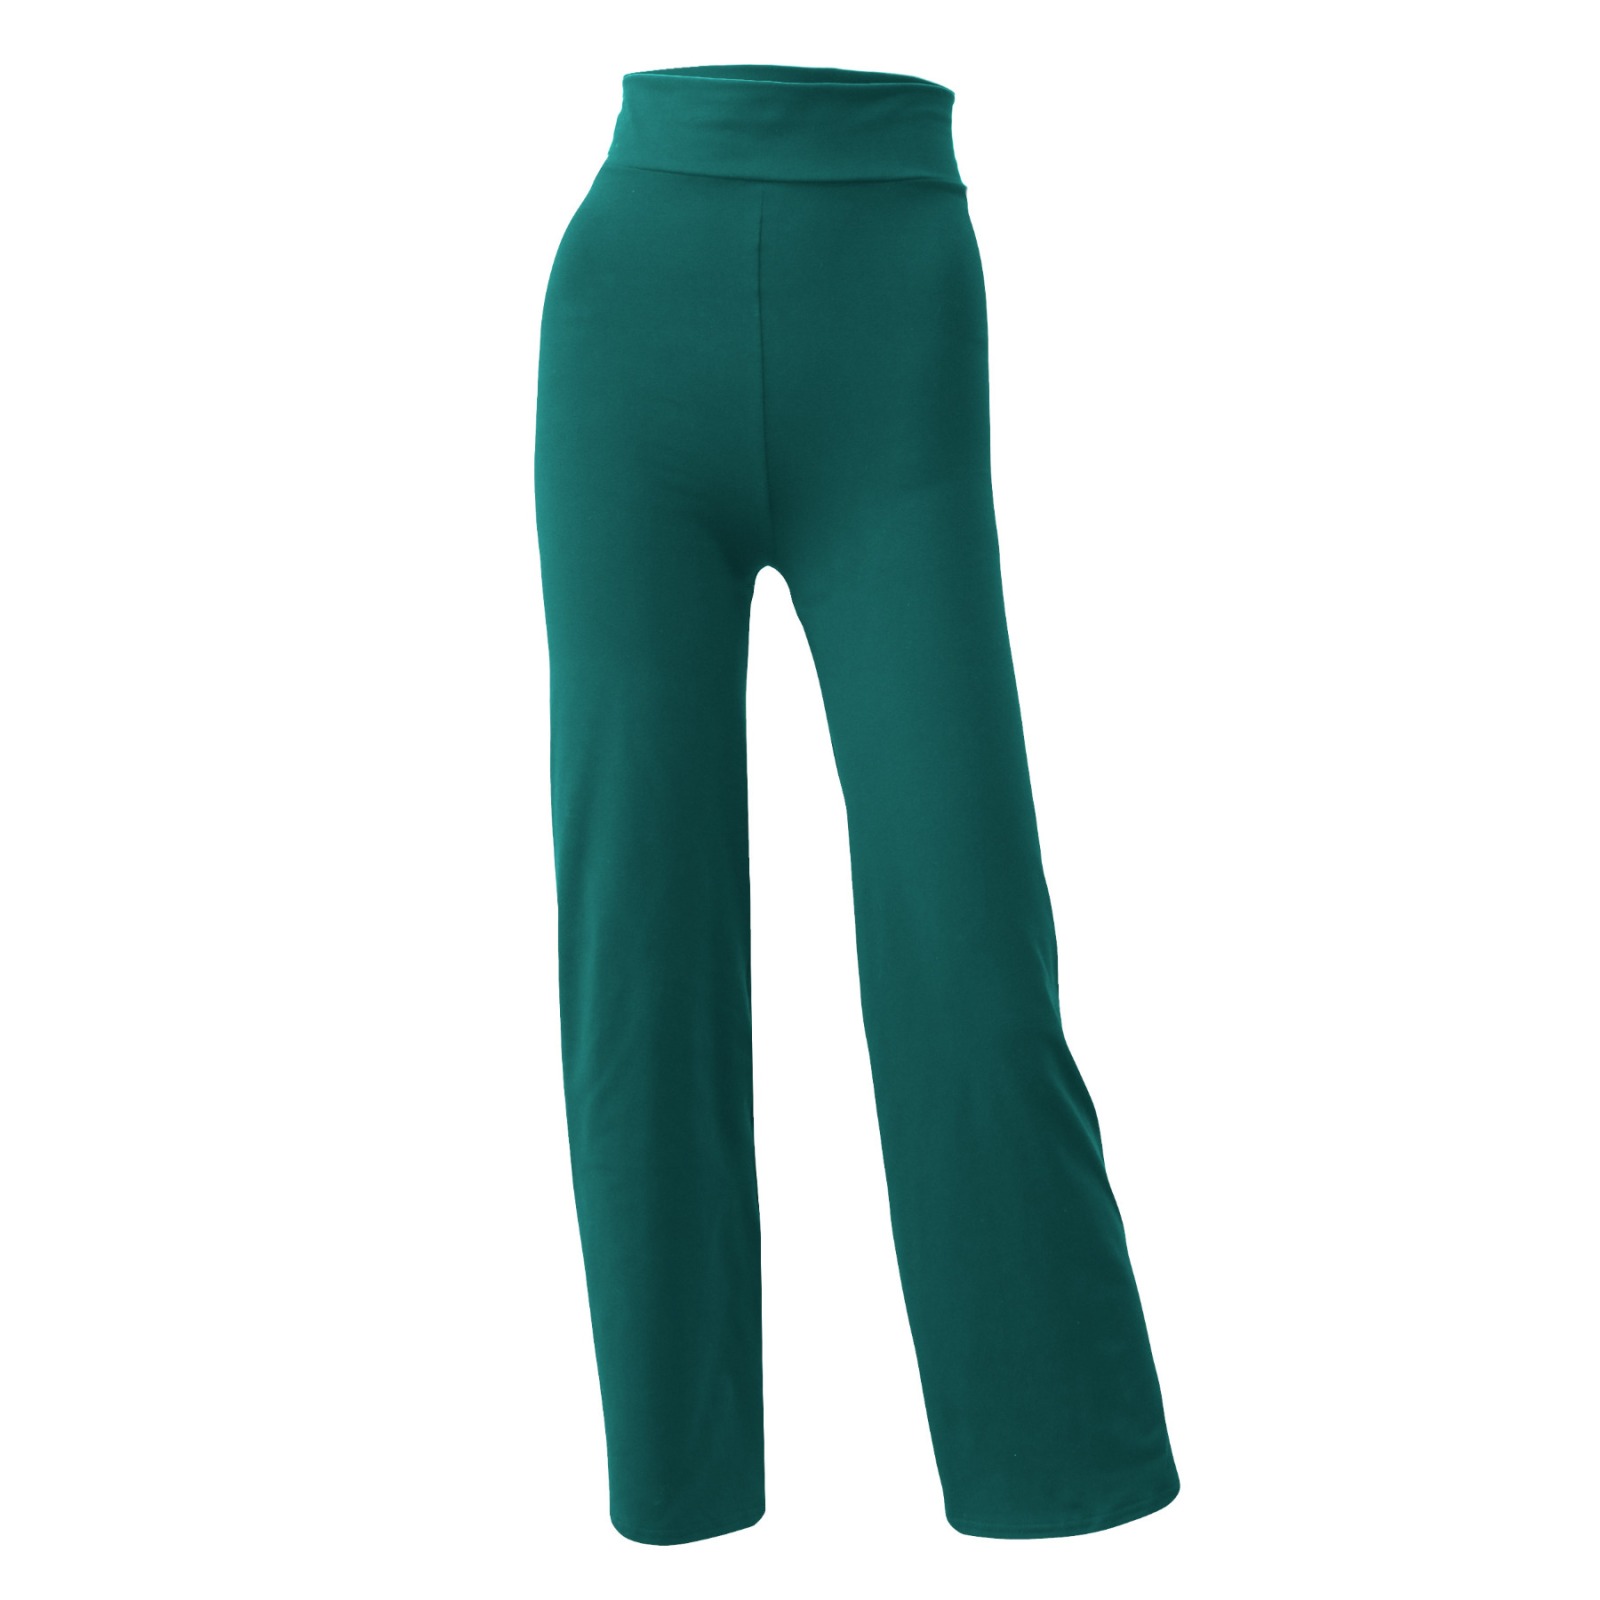 Yoga pants Relaxed Fit smaragd green